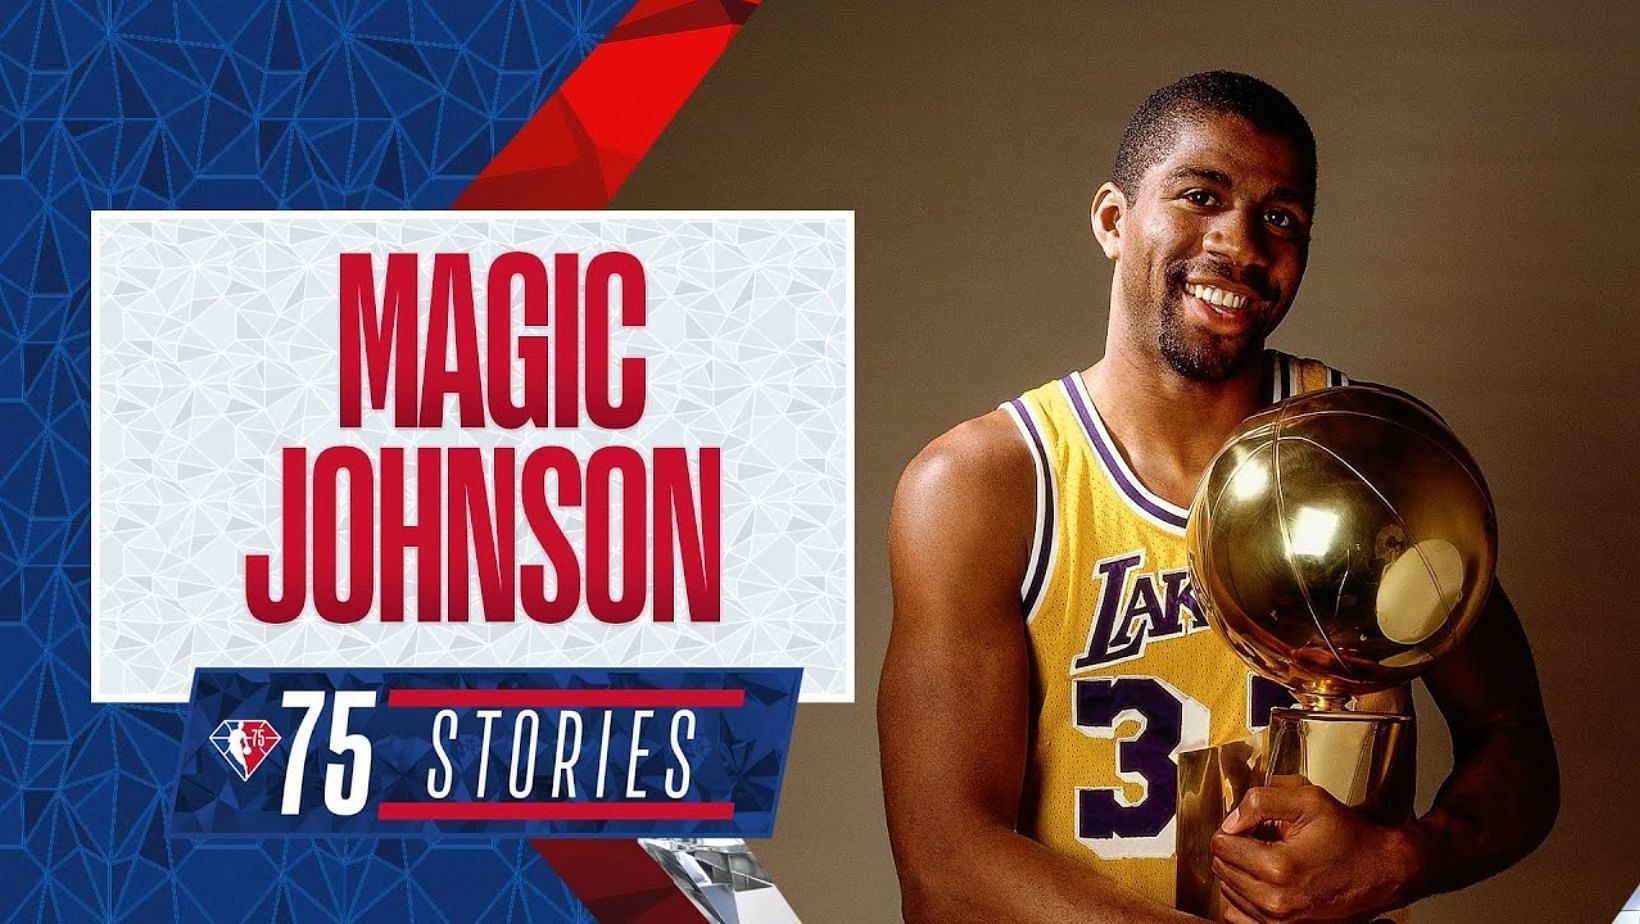 Magic Johnson is a five-time champion with the LA Lakers.